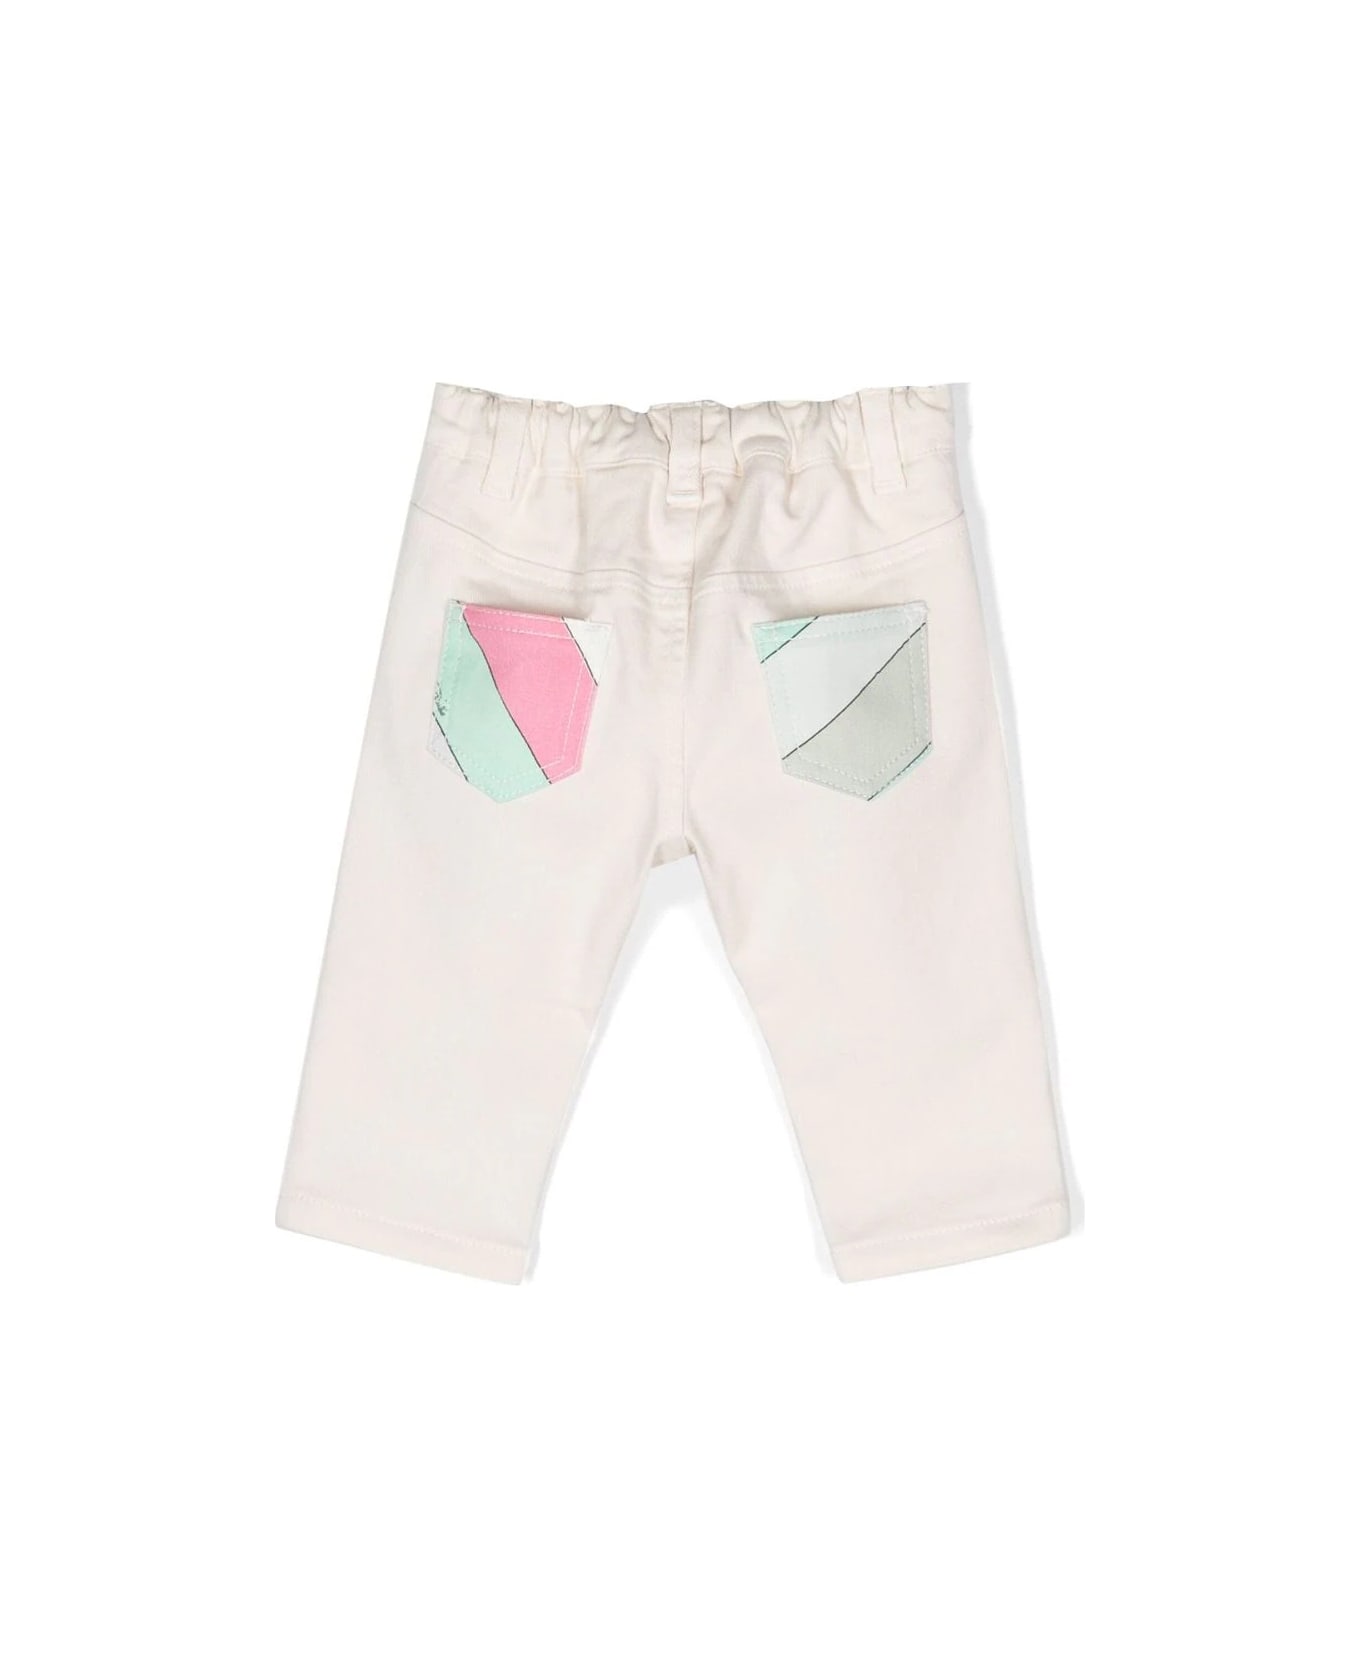 Pucci White Jeans With Pastel Iride Print - Bianco